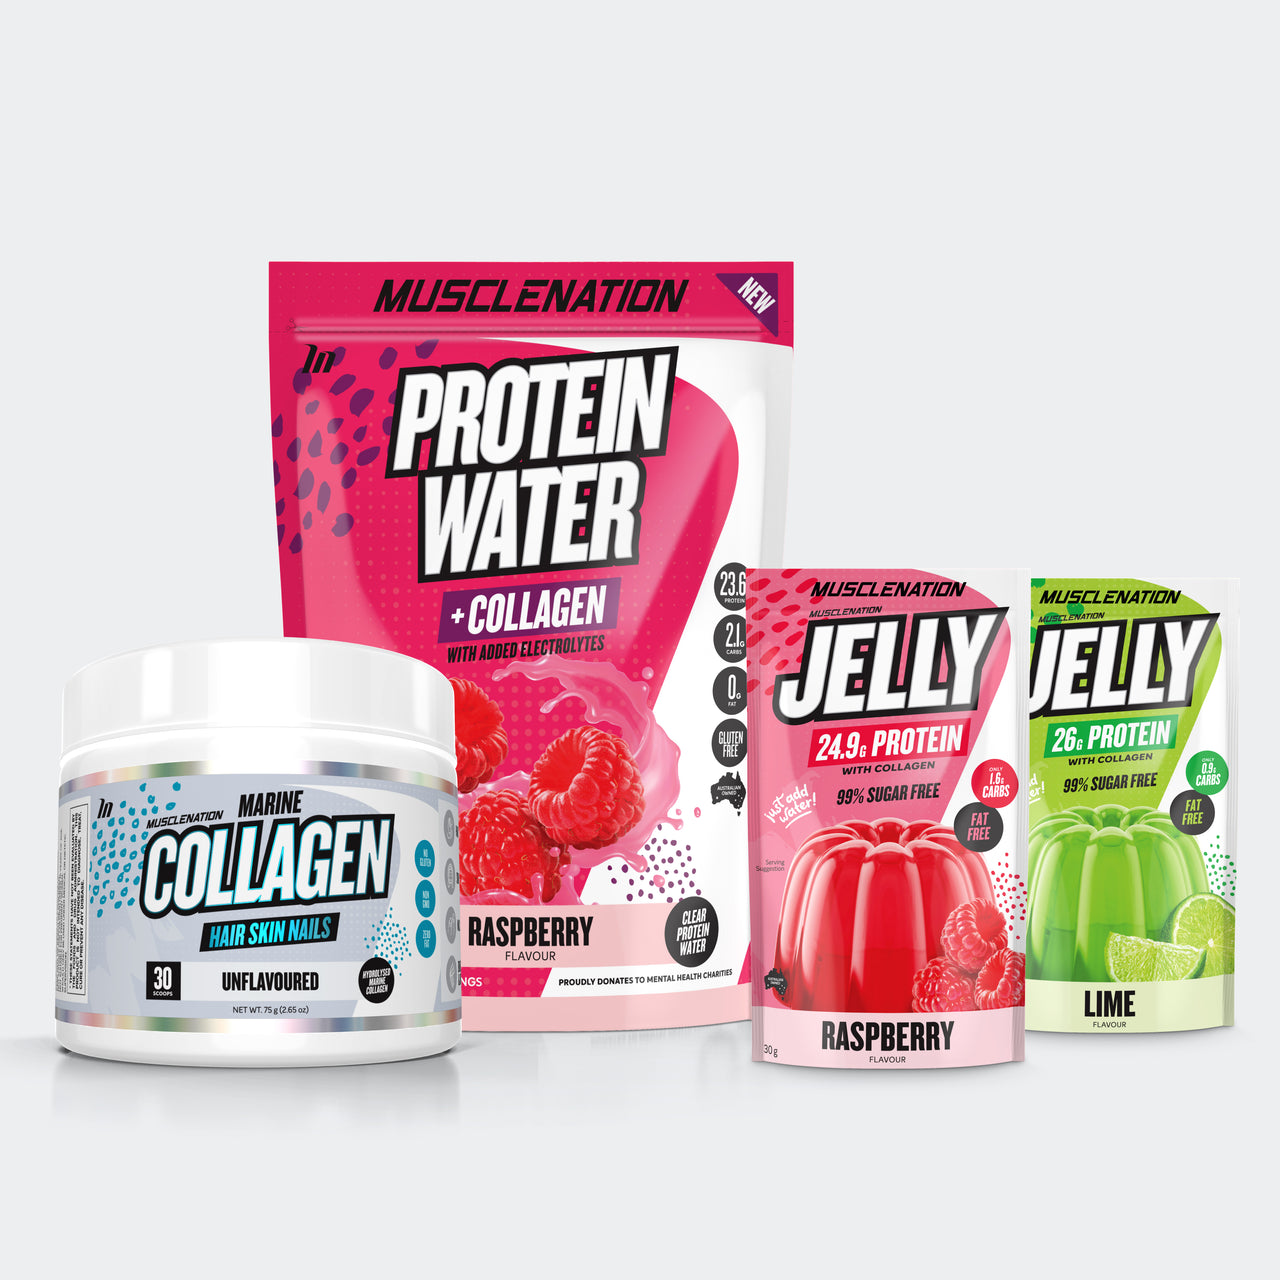 PROTEIN JELLY + Collagen Raspberry 10 serves Muscle Nation